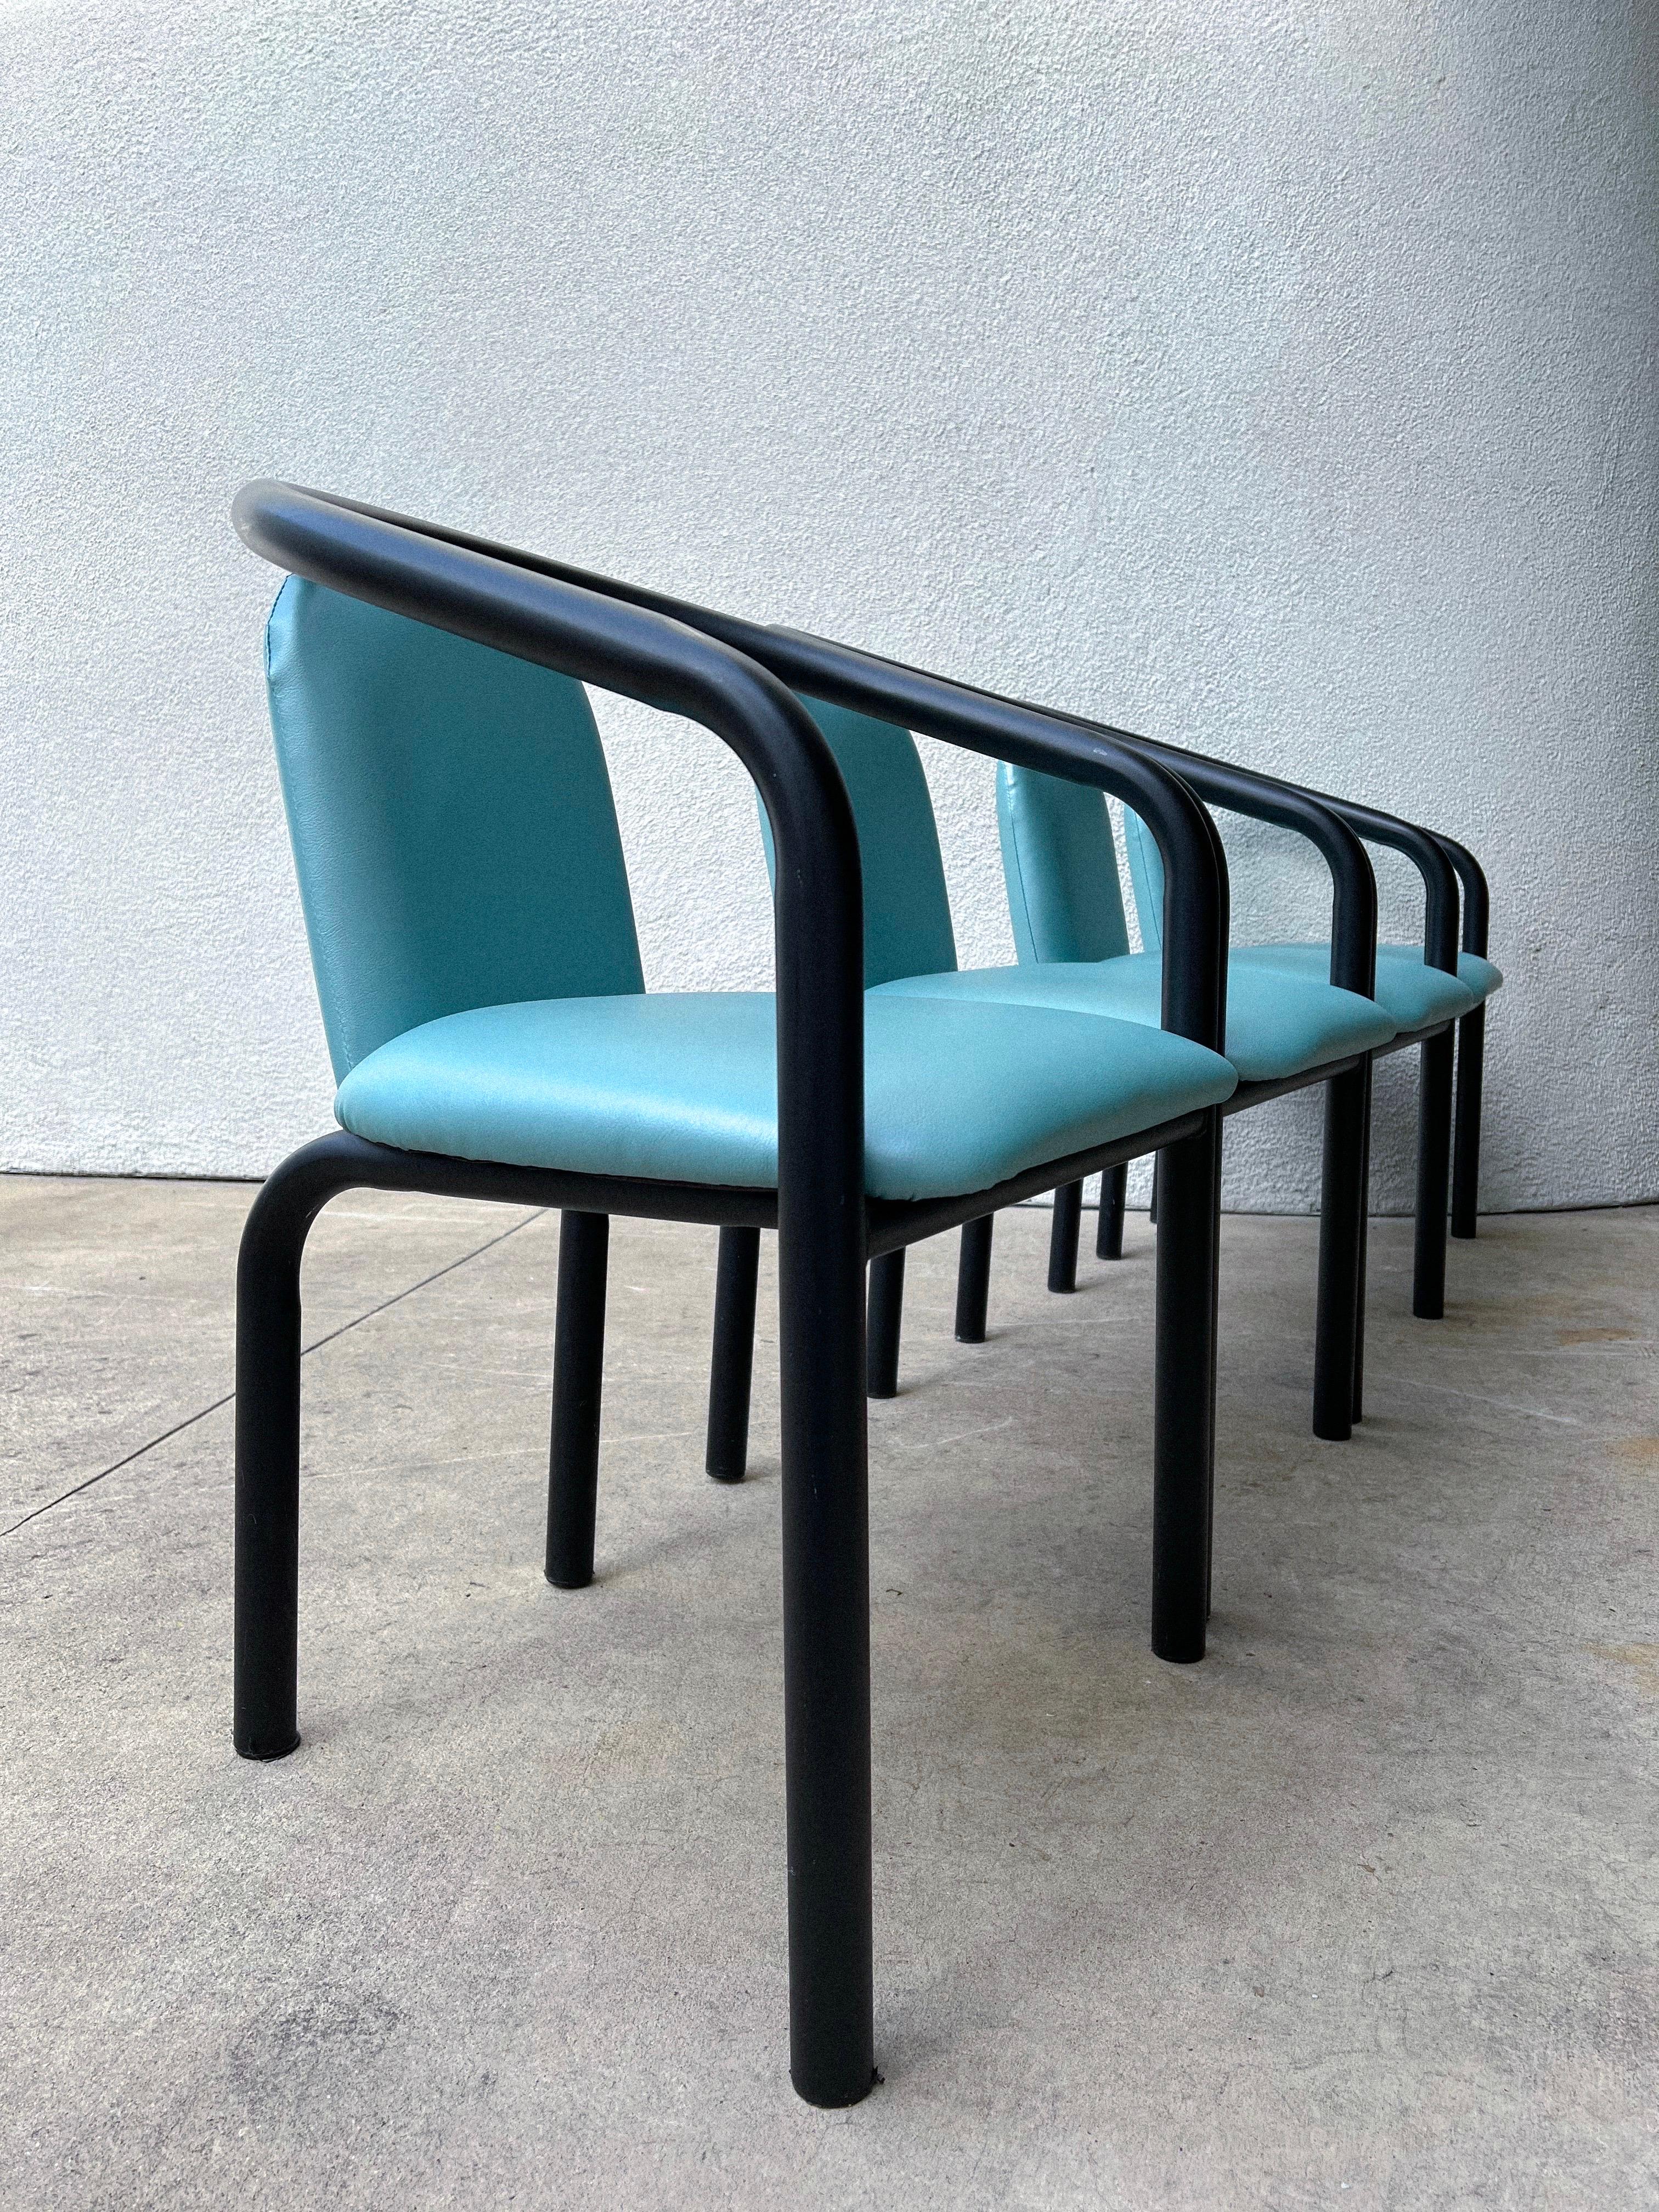 Late 20th Century 1980s Postmodern Tubular Vinyl Chairs - Set of 4 For Sale